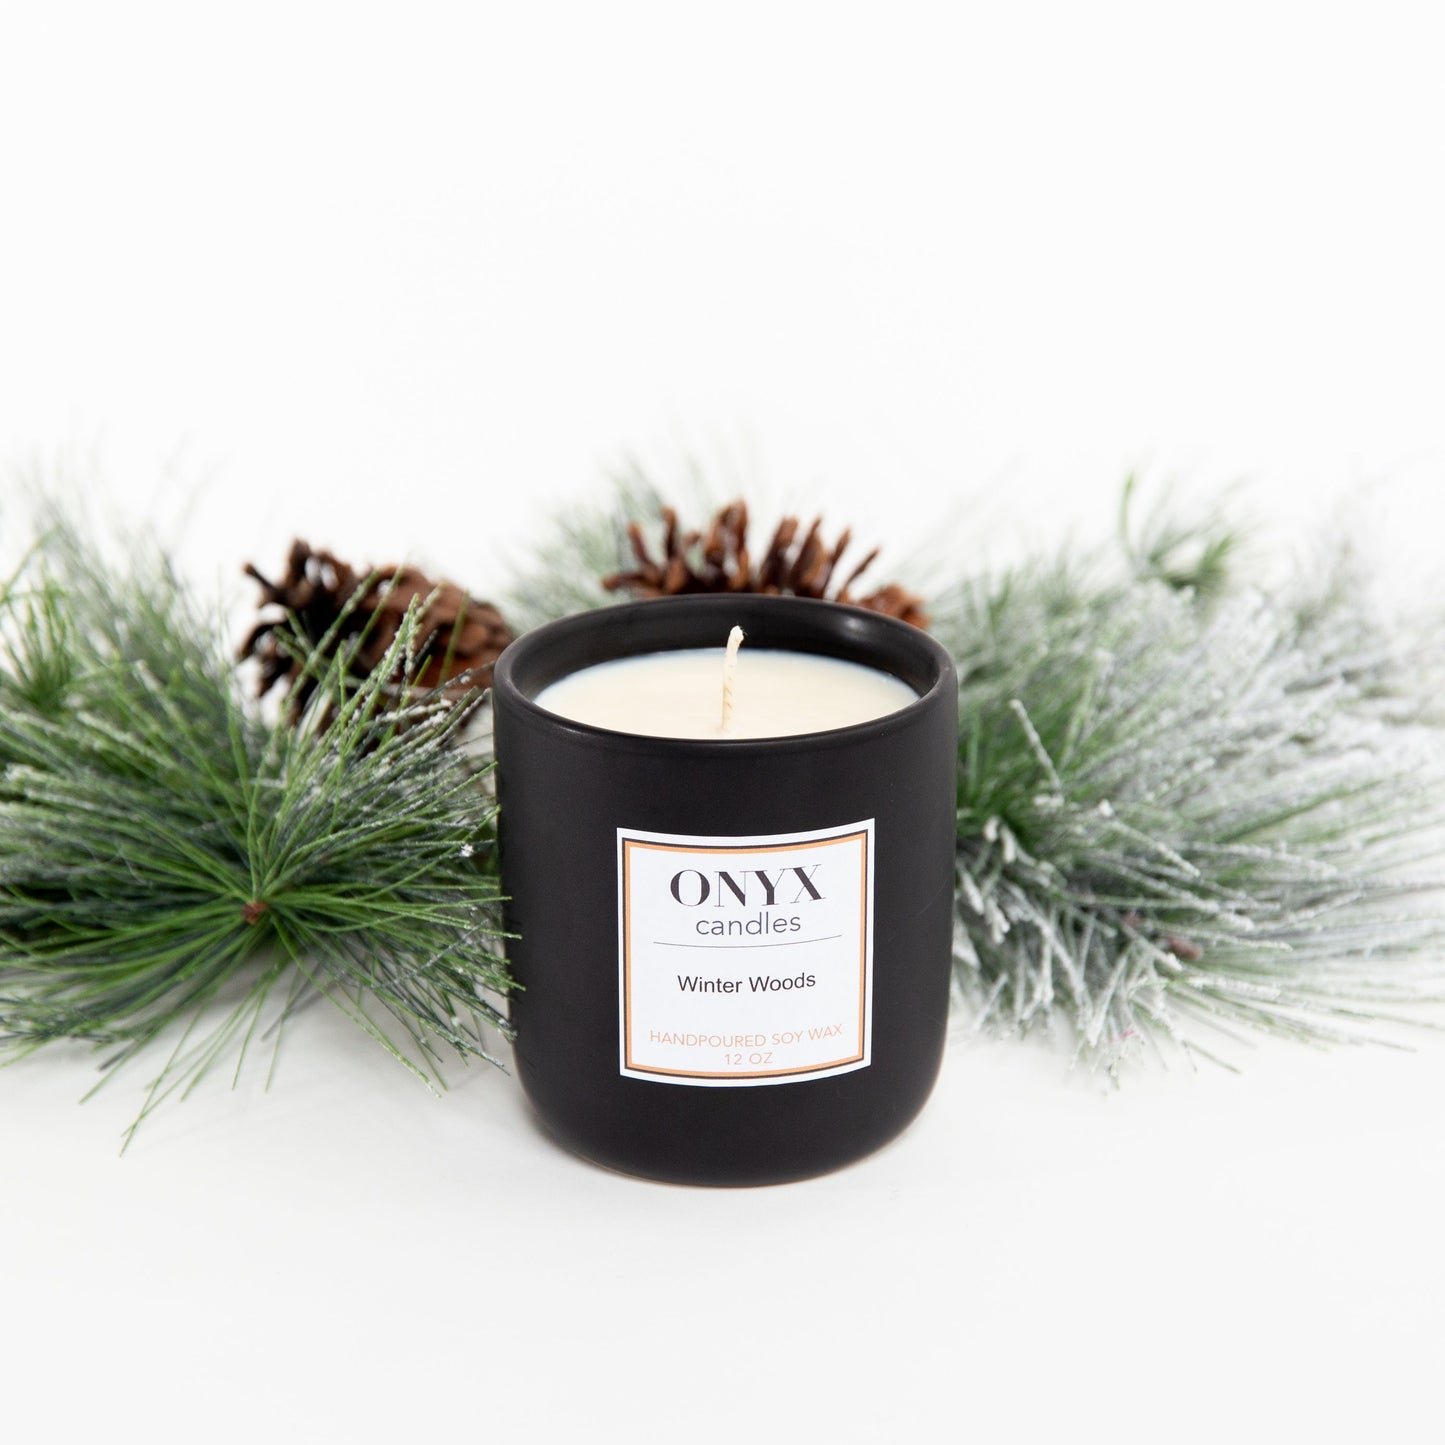 Winter Woods candle in a 12 oz matte black ceramic jar, the candle sits upon winter greens and pinecones